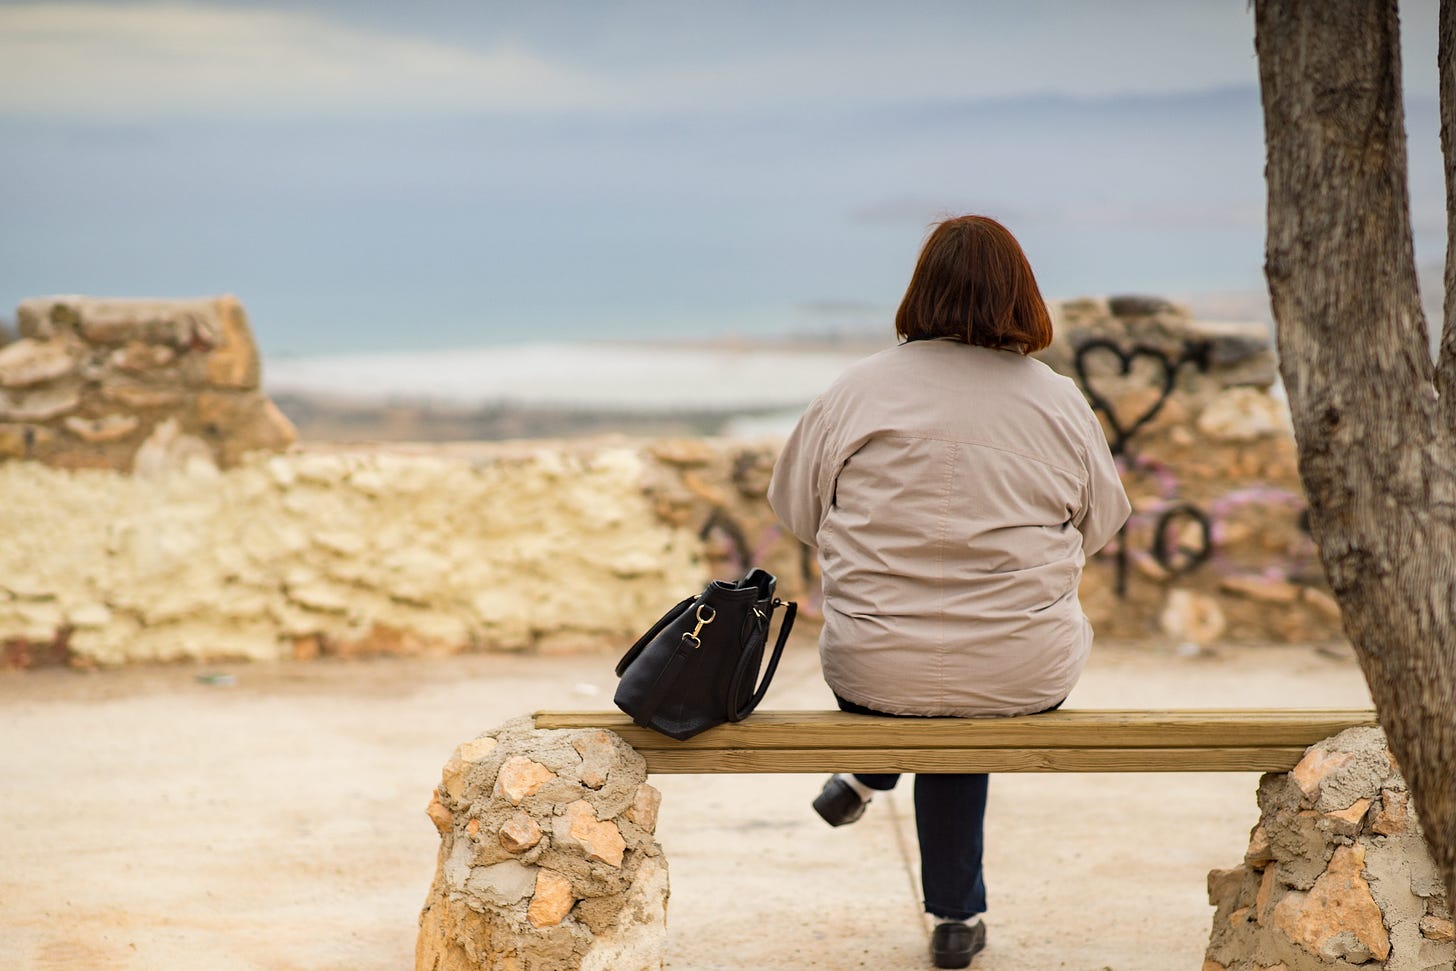 Older female sitting on bench with back to camera, in a bare, rock walled park looking out over blue sky background.